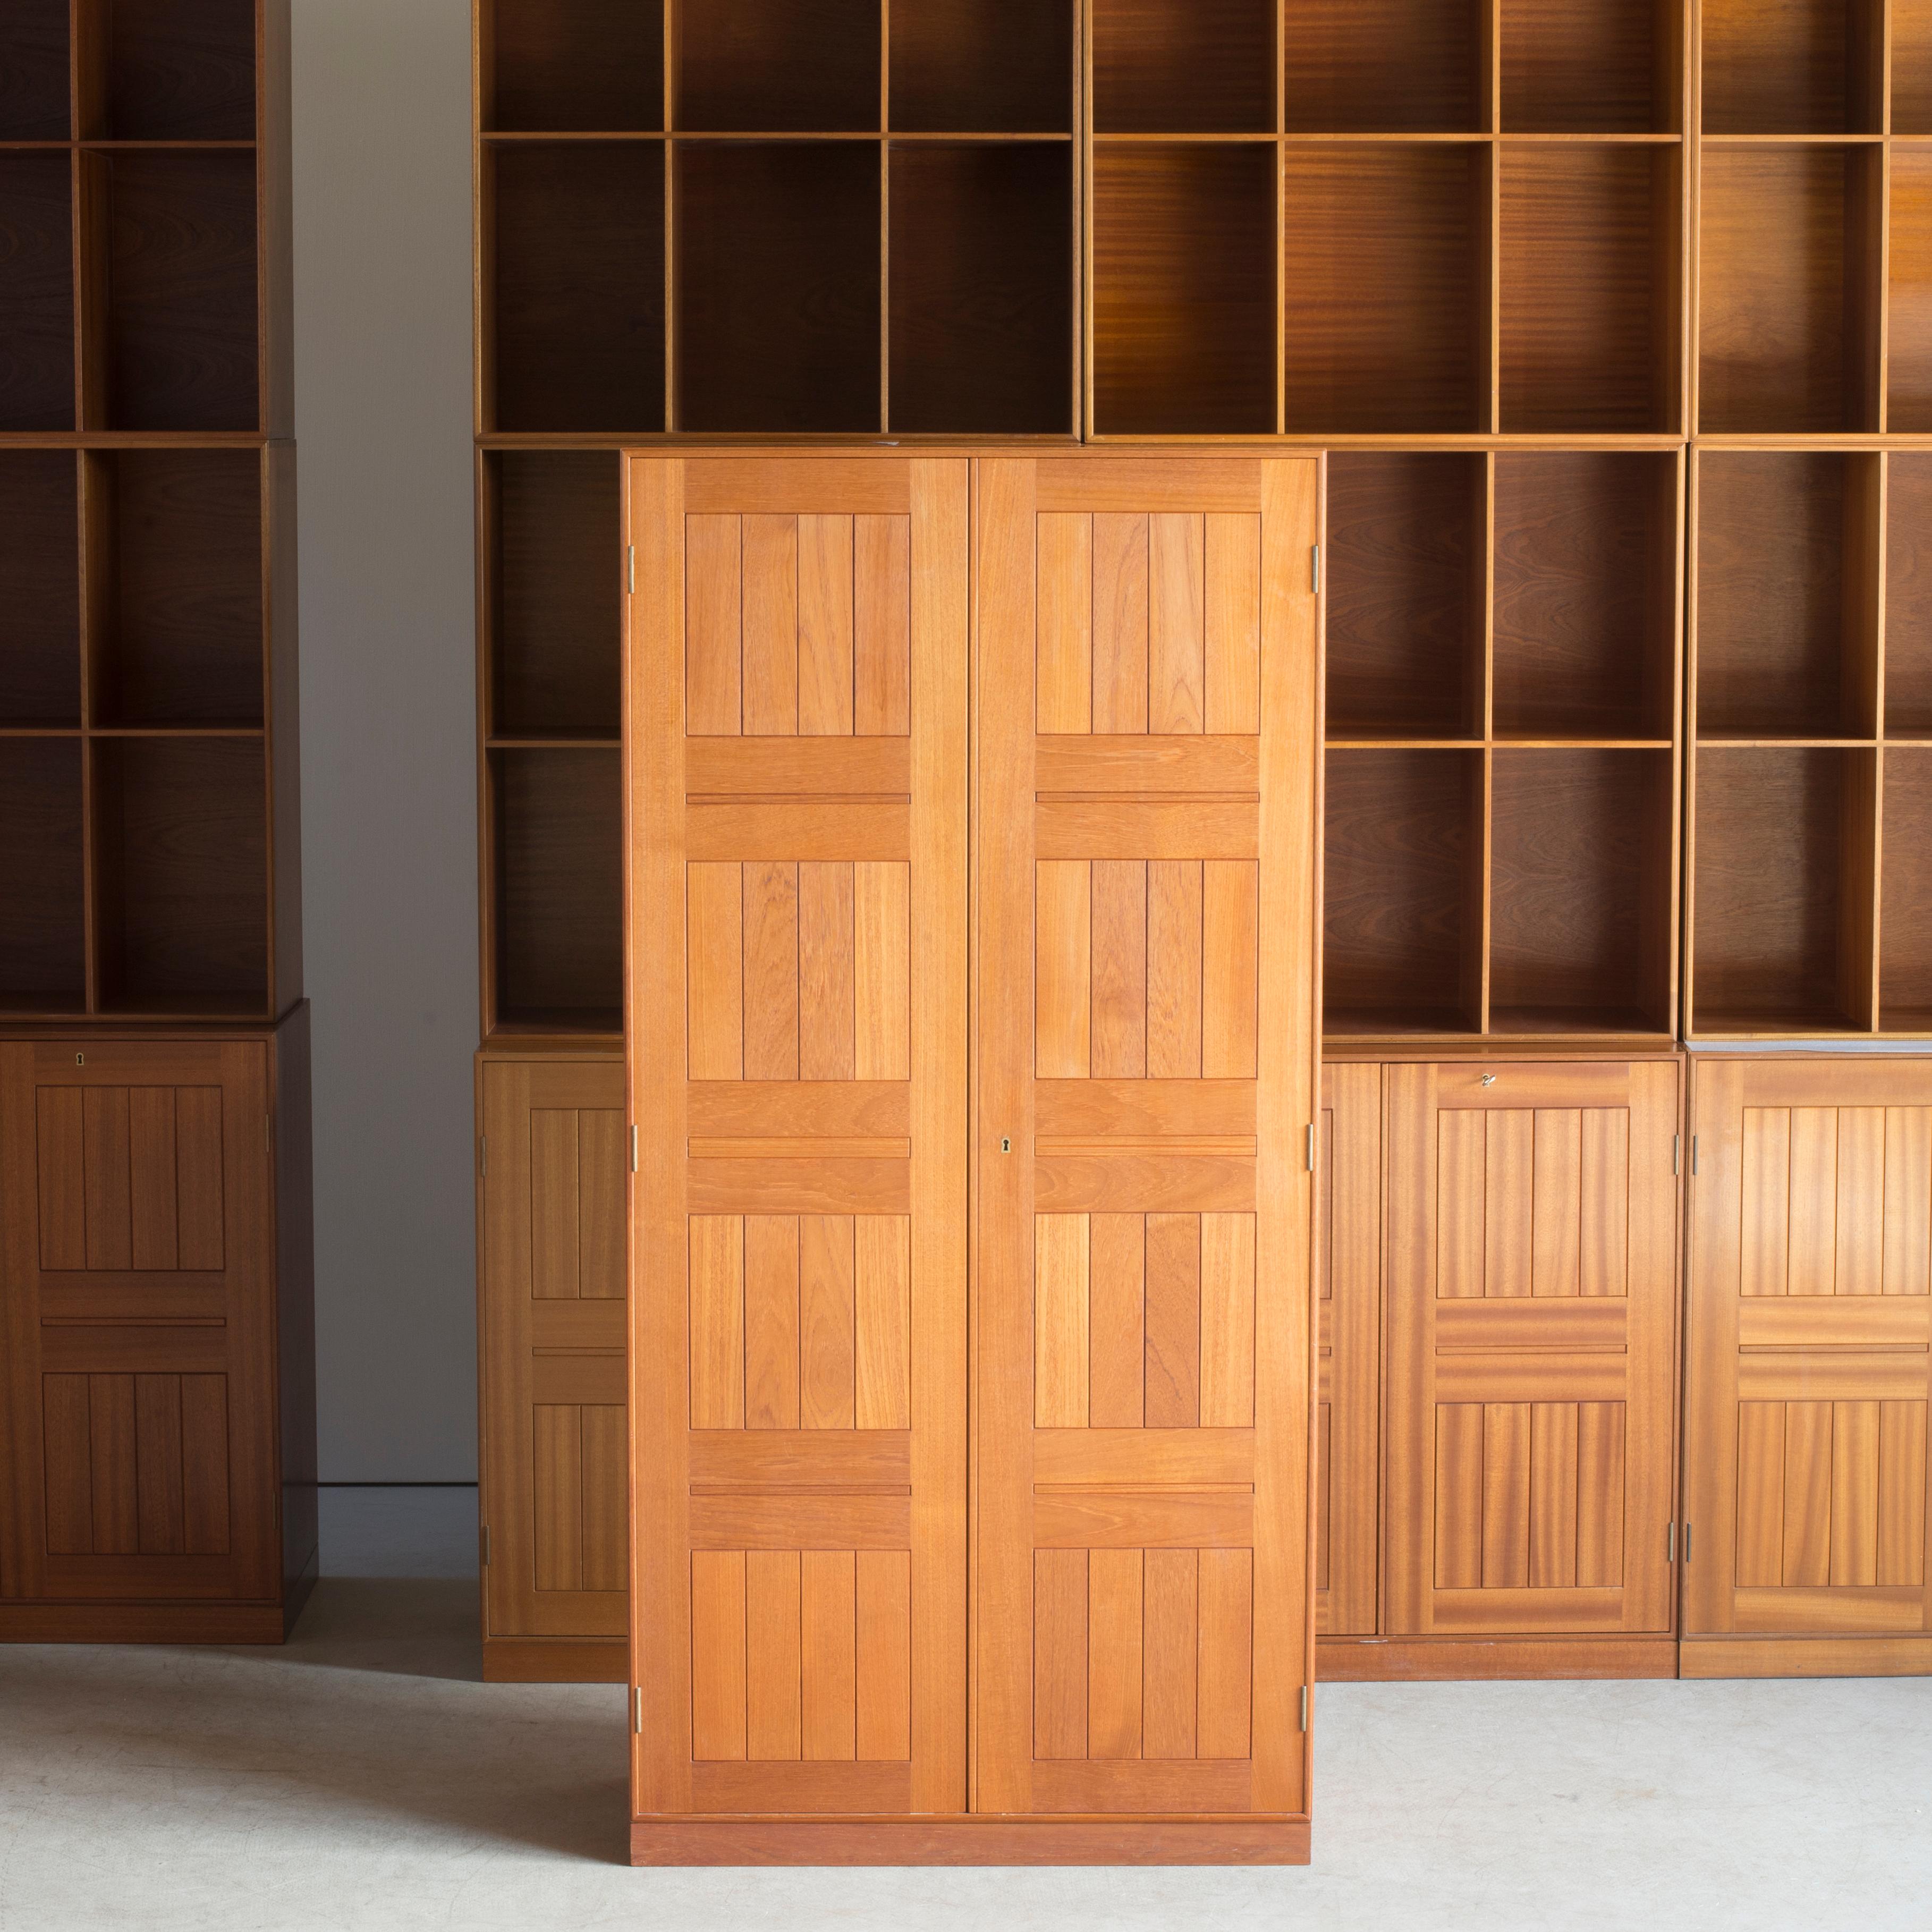 Wardrobe of teak with matching plinth. Made and marked by Rud. Rasmussen cabinetmakers, Copenhagen.